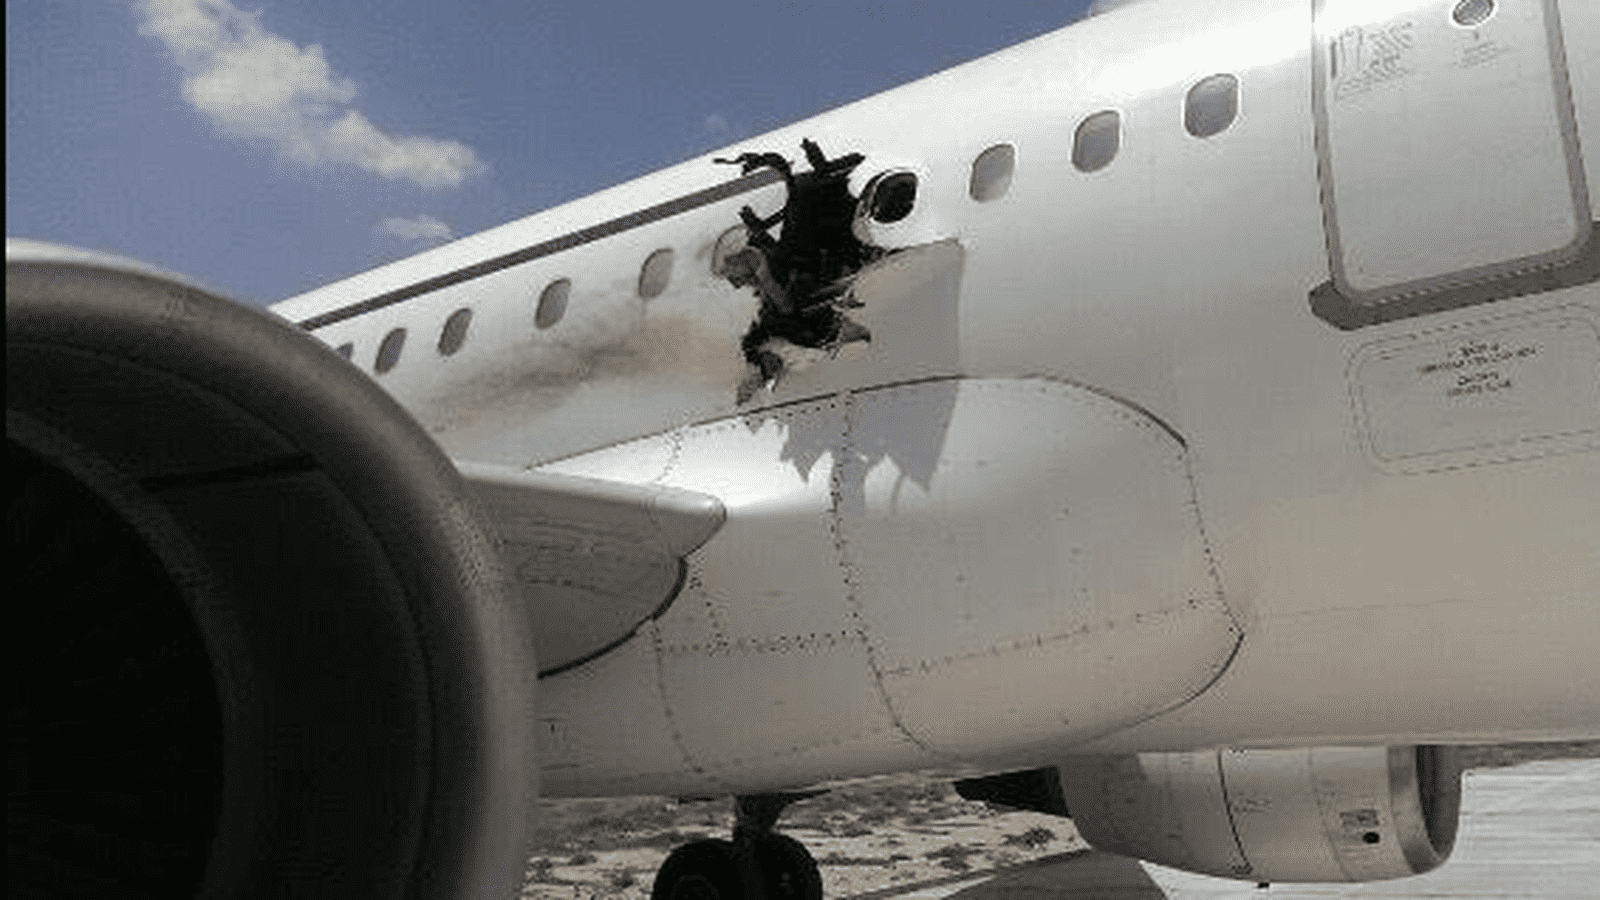 Hole in aircraft